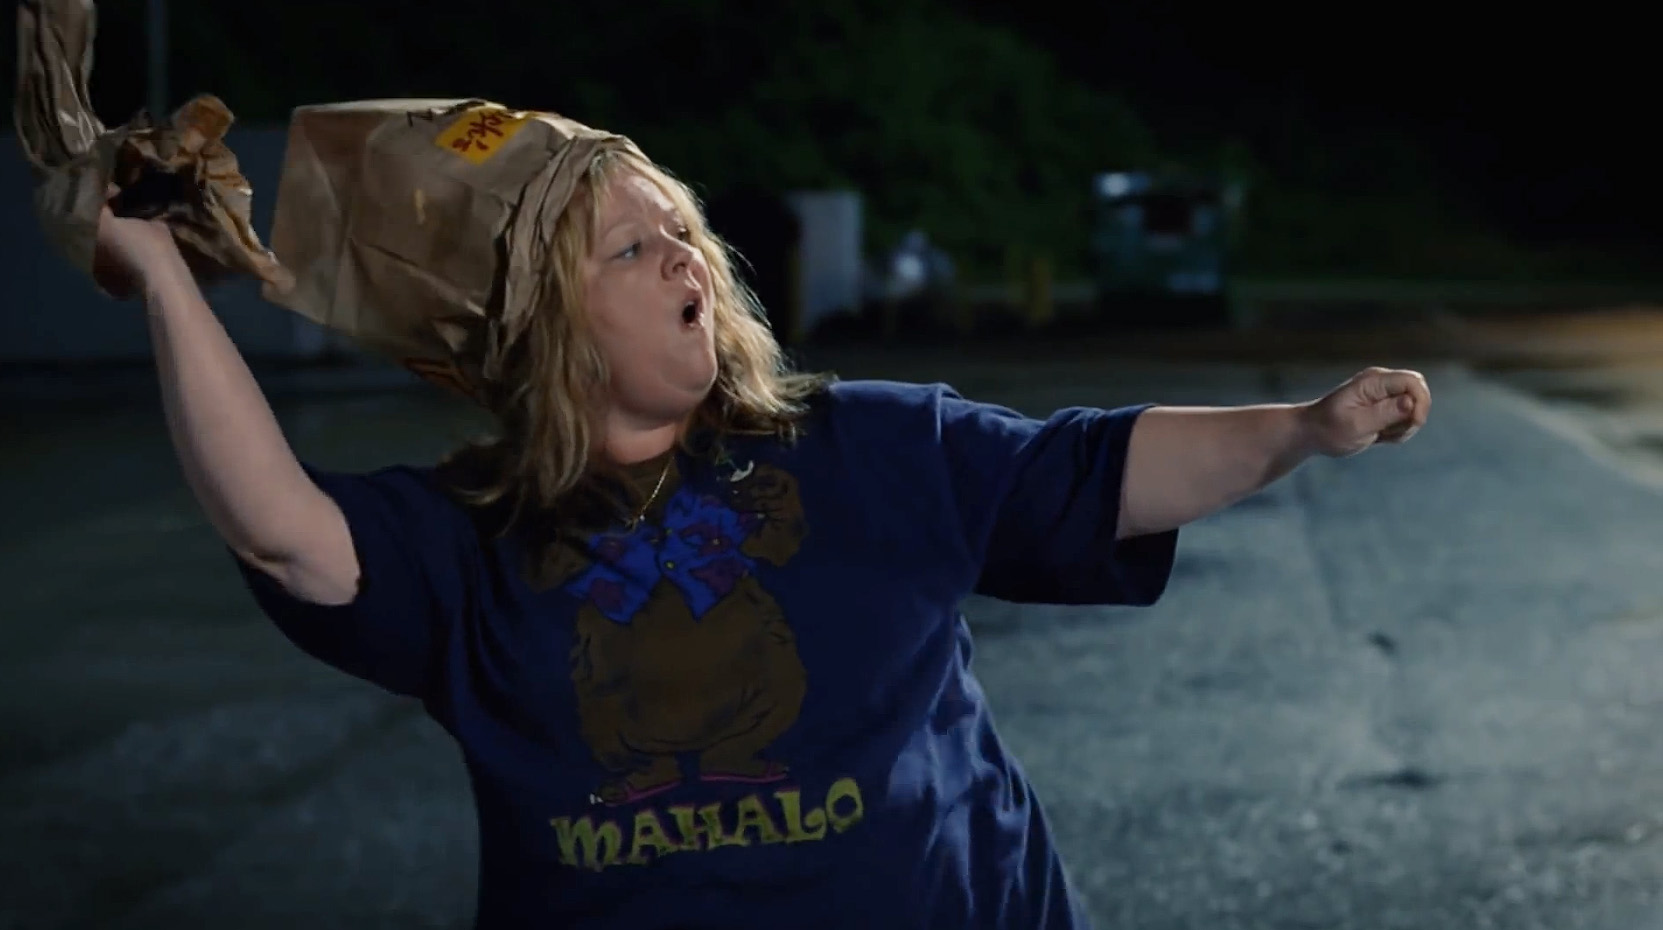 Movie Poll: What’s your favorite Melissa McCarthy movie?